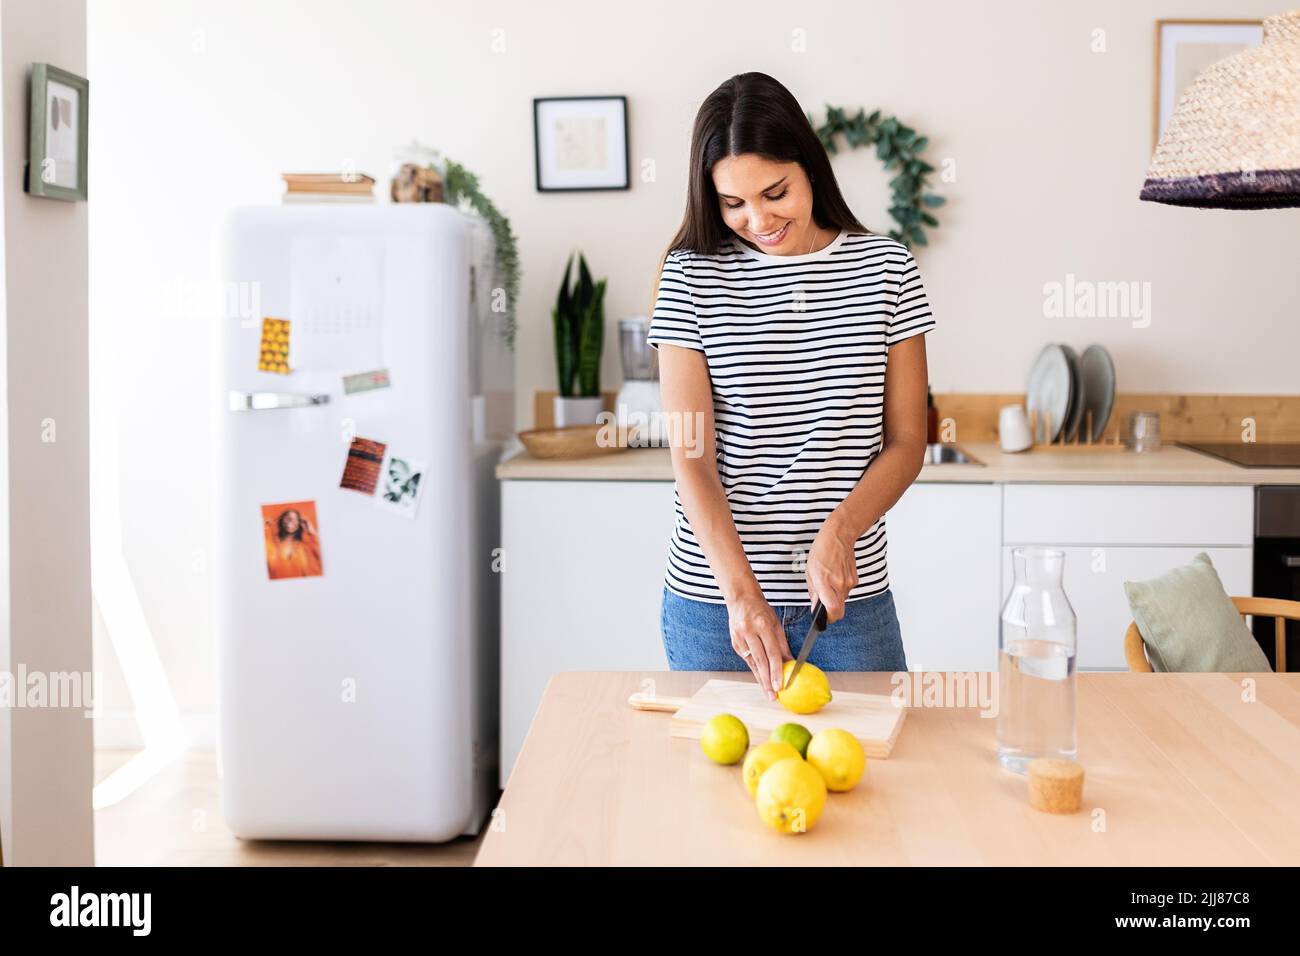 Serene young adult woman preparing homemade lemon juice in the kitchen at home Stock Photo